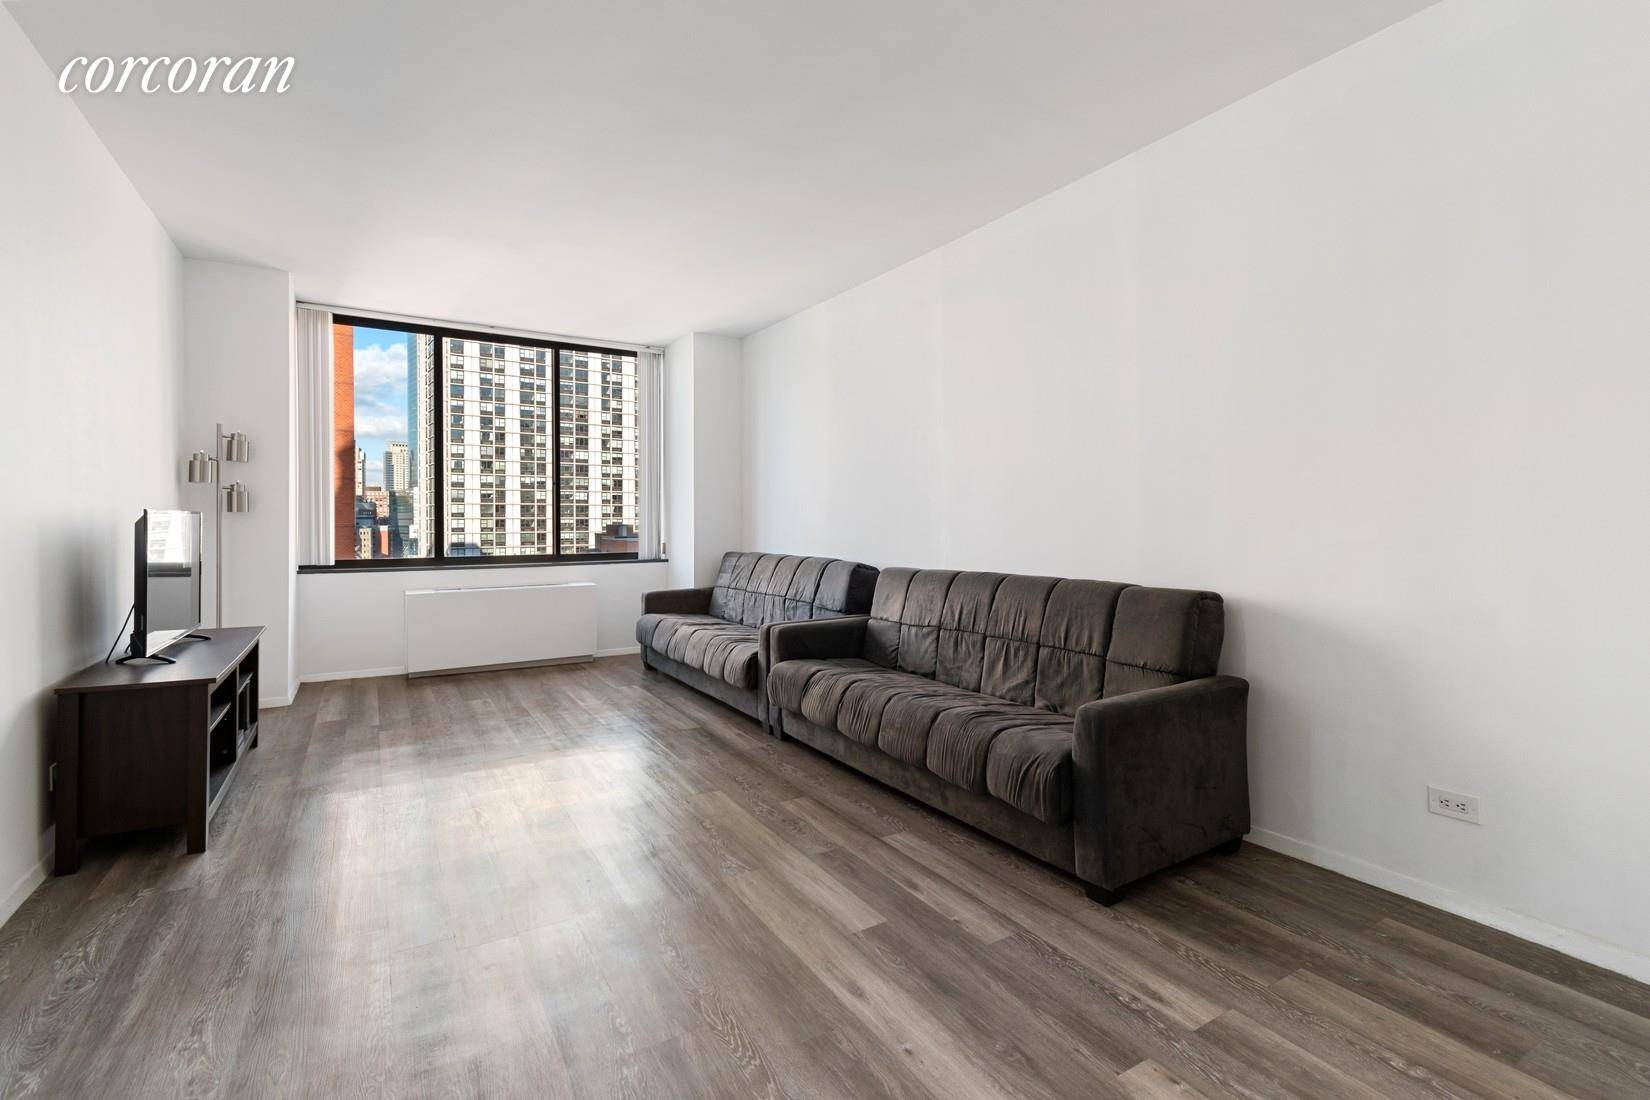 Wake up to breathtaking views of the Hudson River and Freedom Tower !